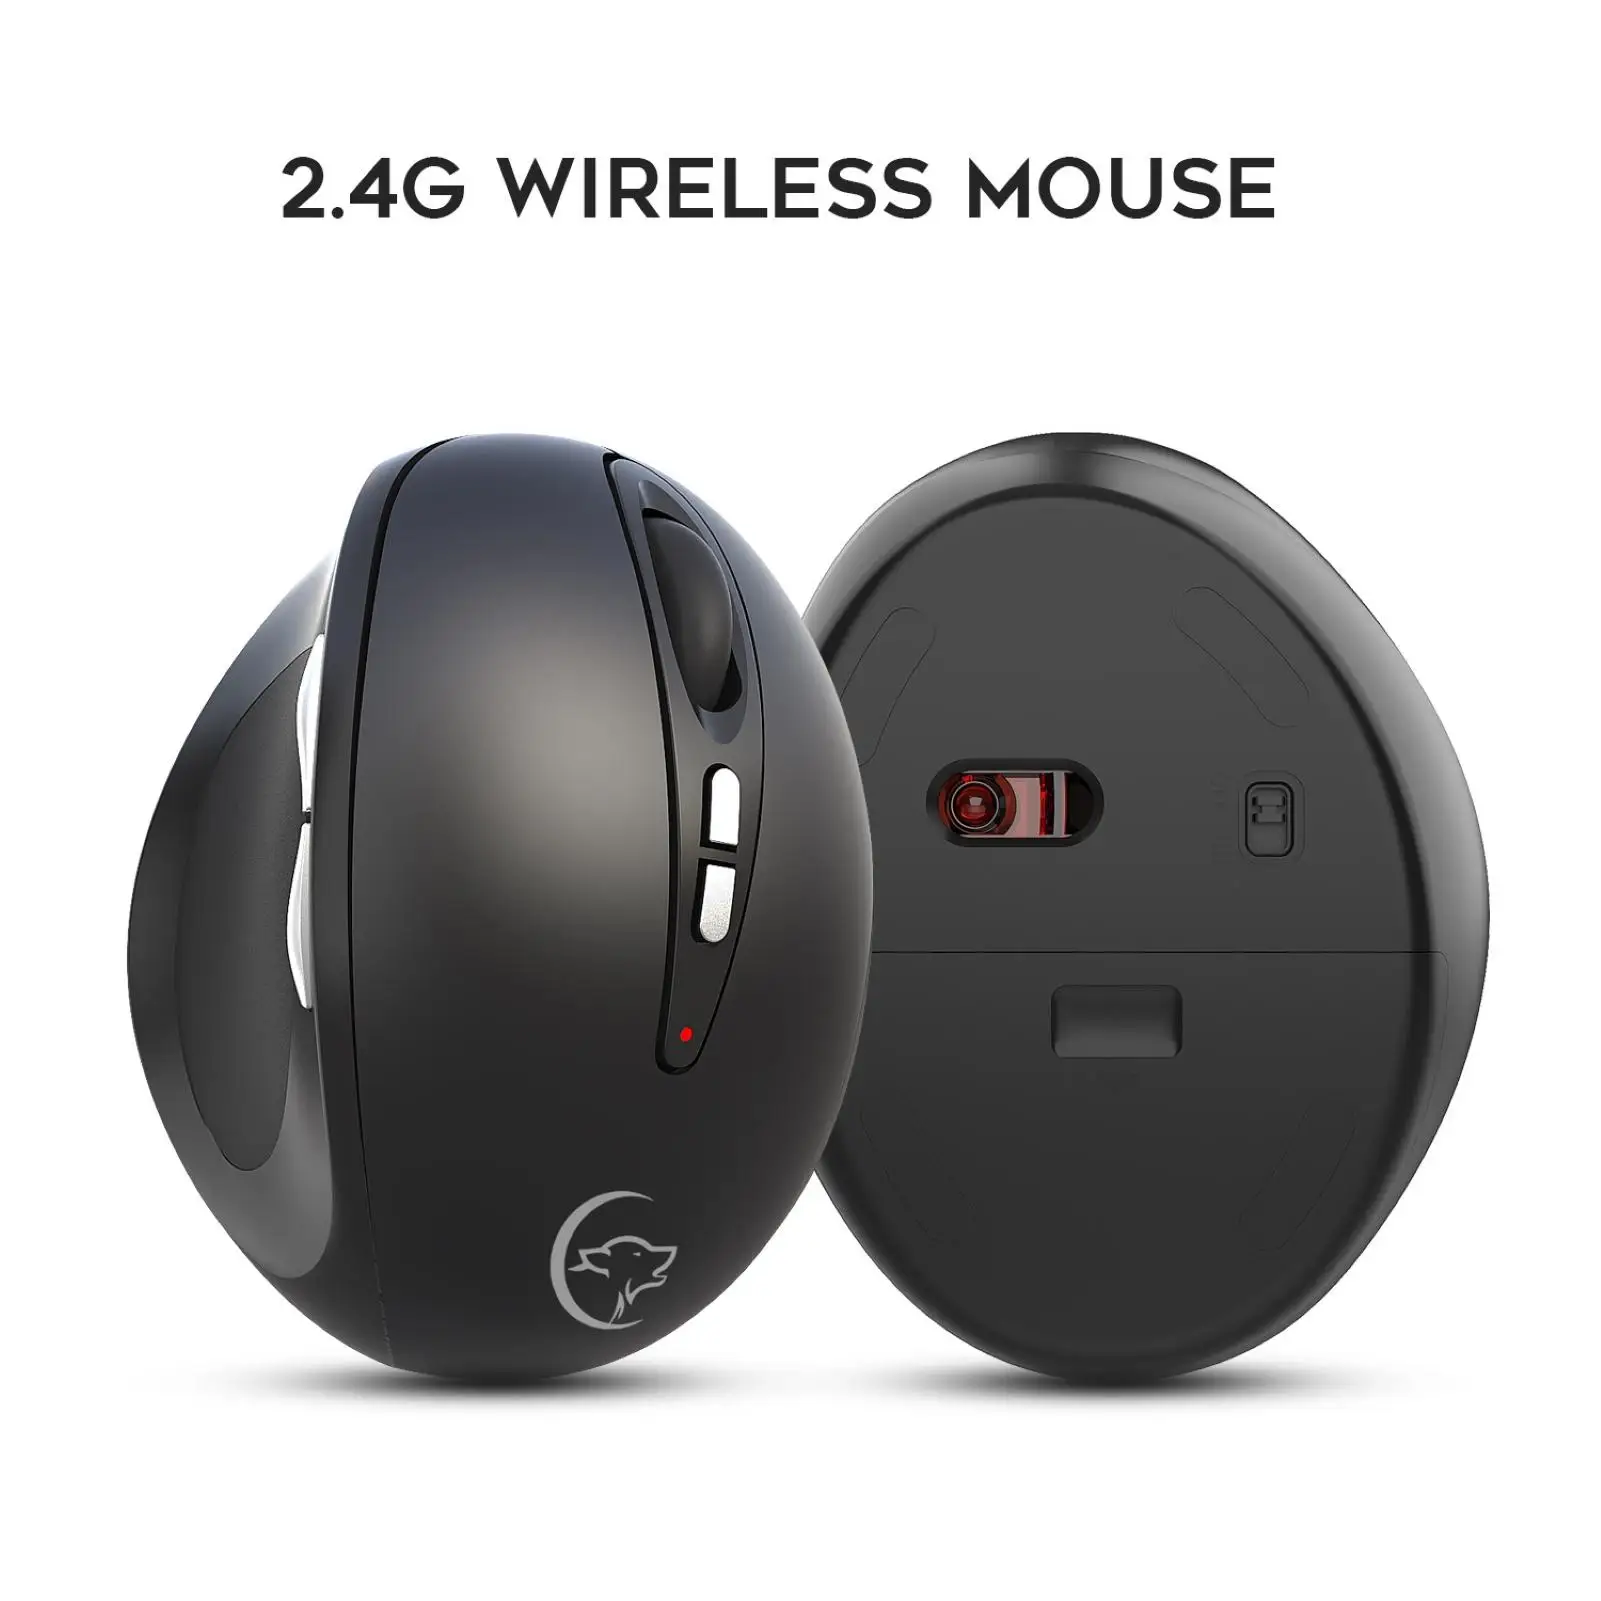 

NEW Wireless Mouse Ergonomic Optical YWYT G836 Wireless 2400DPI Colorful Light Wrist Healing Vertical Mice Gaming Mouse Gamer